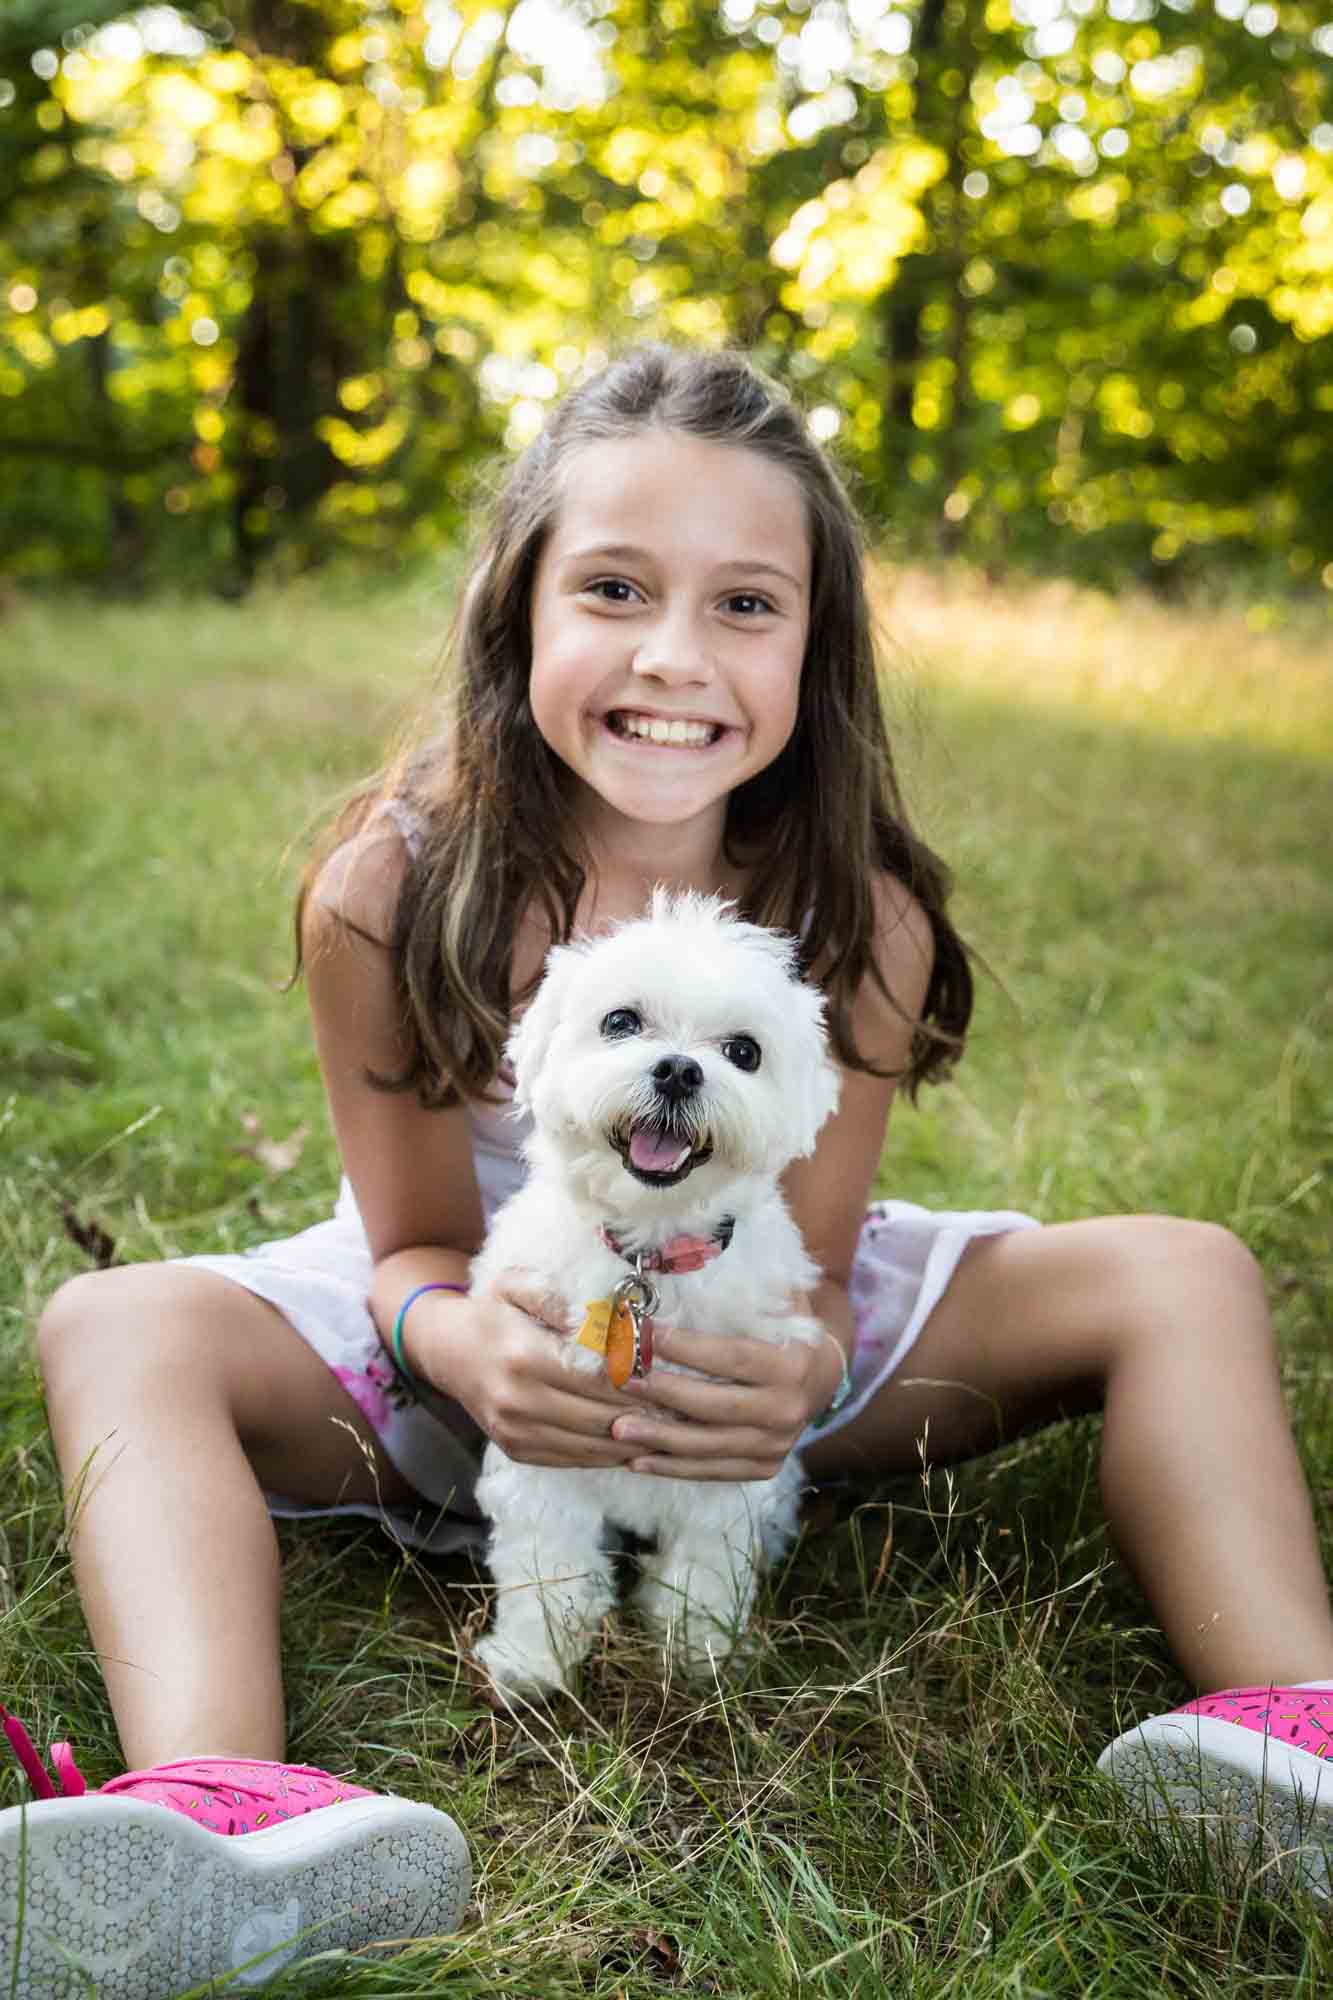 Young girl with long brown hair sitting on ground holding small, white dog